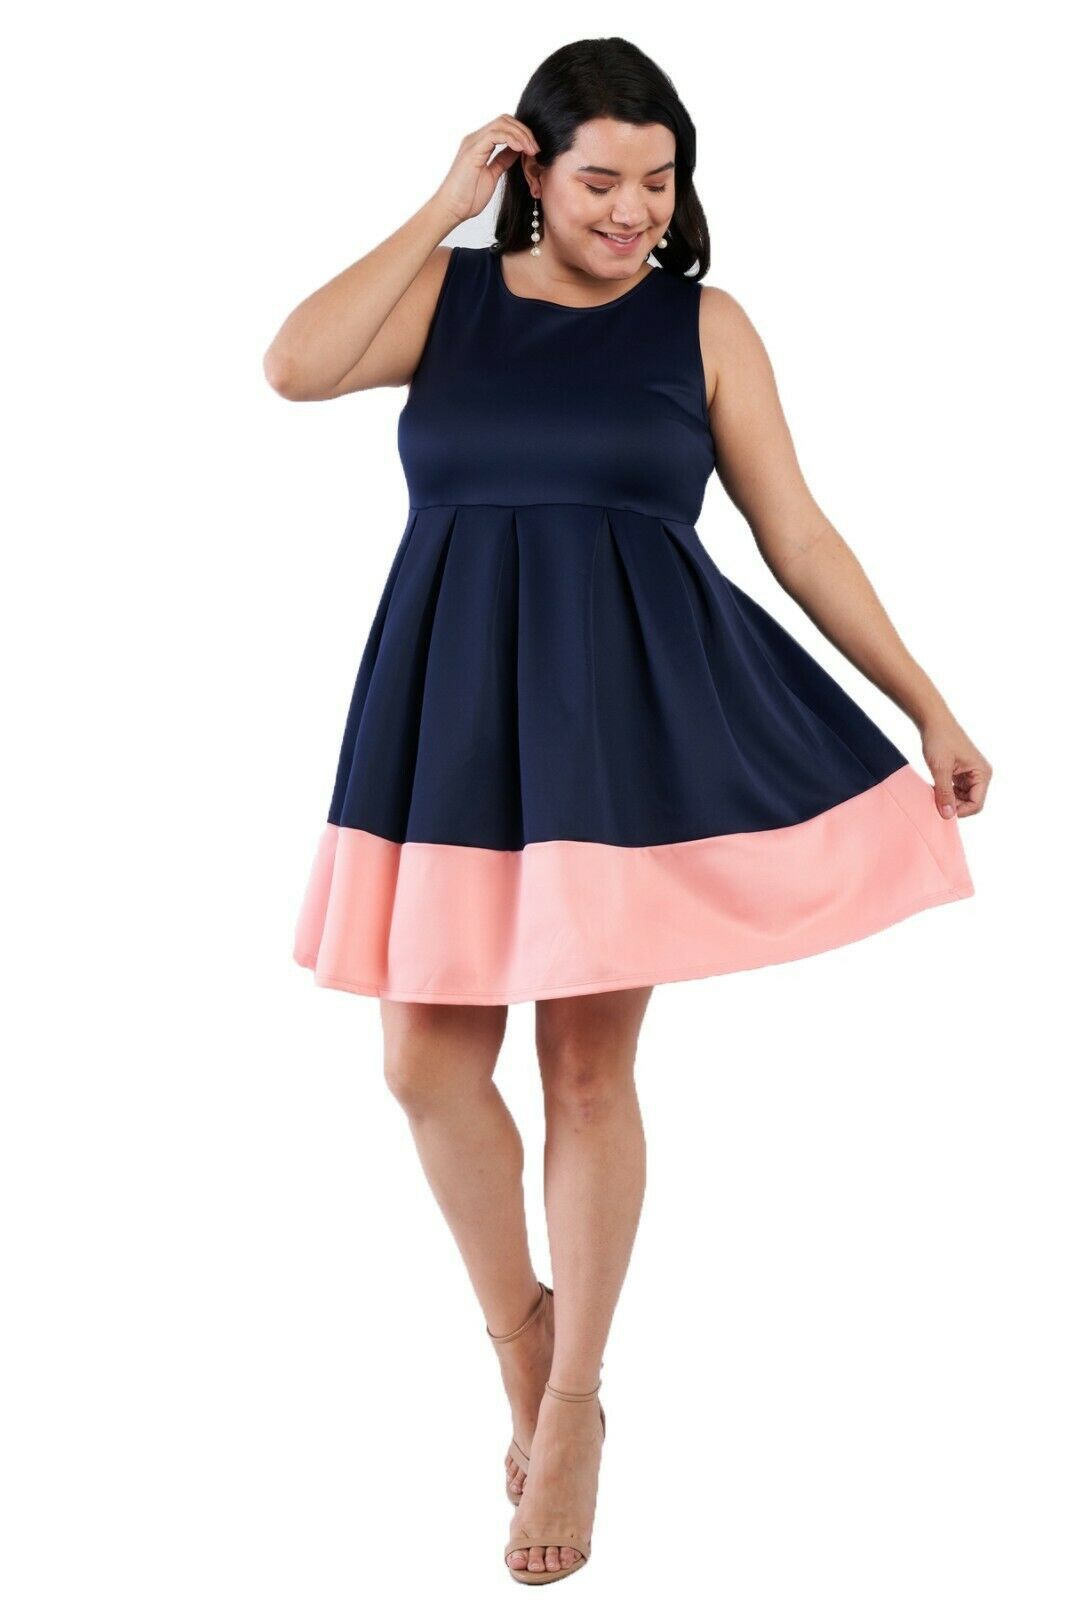 Plus Size Women Fashion Navy Pink Pleated Colorblock Cocktail Stretch Mini Dress